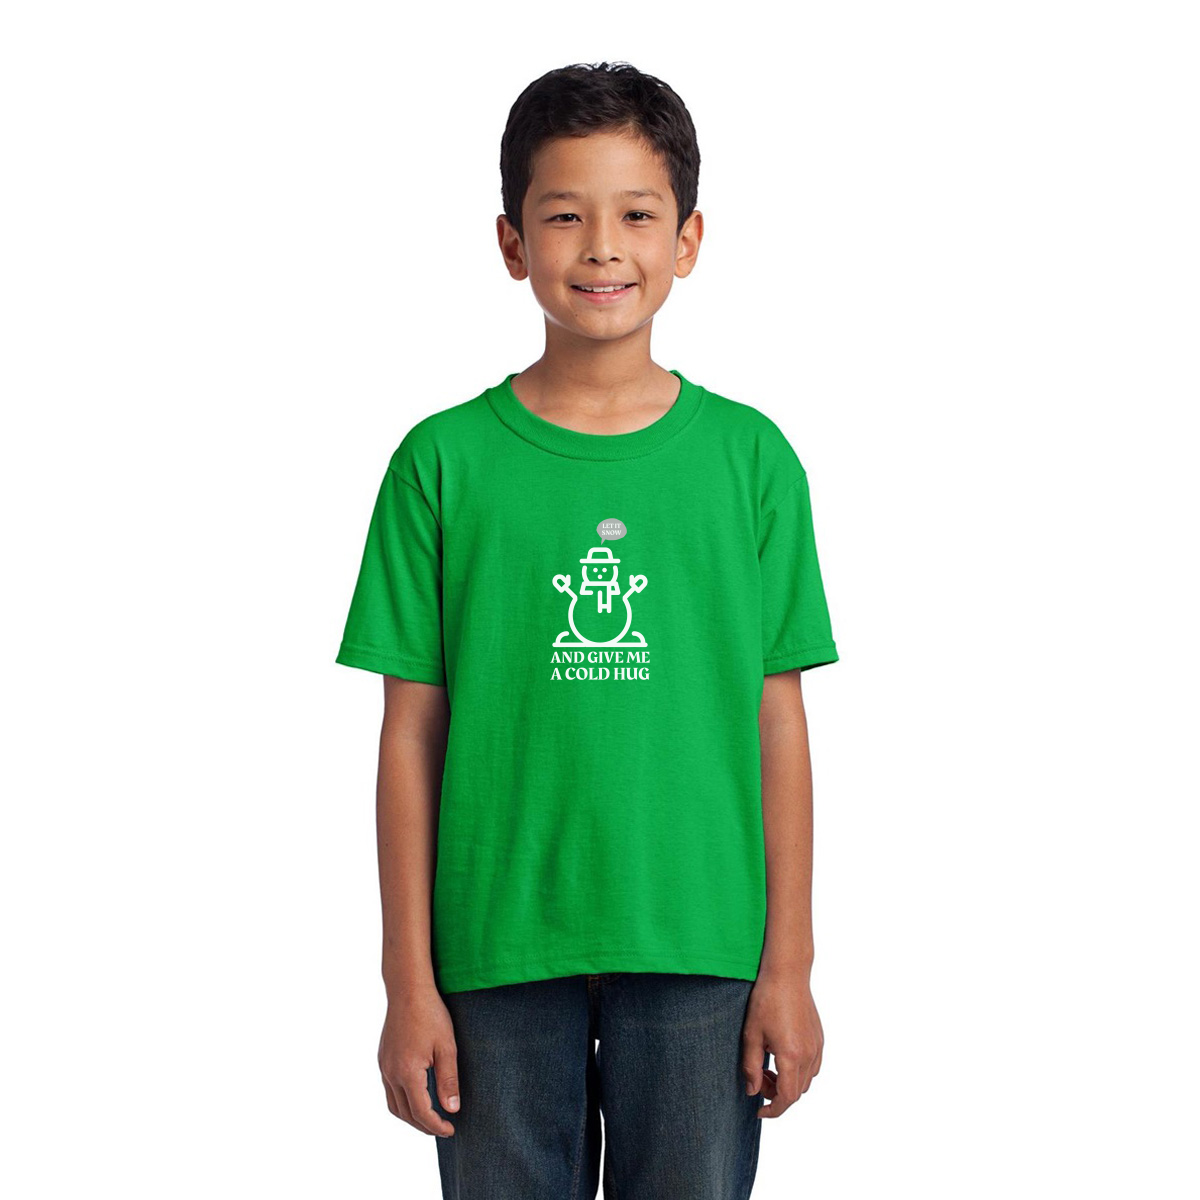 Let It Snow and Give Me a Cold Hug Kids T-shirt | Green